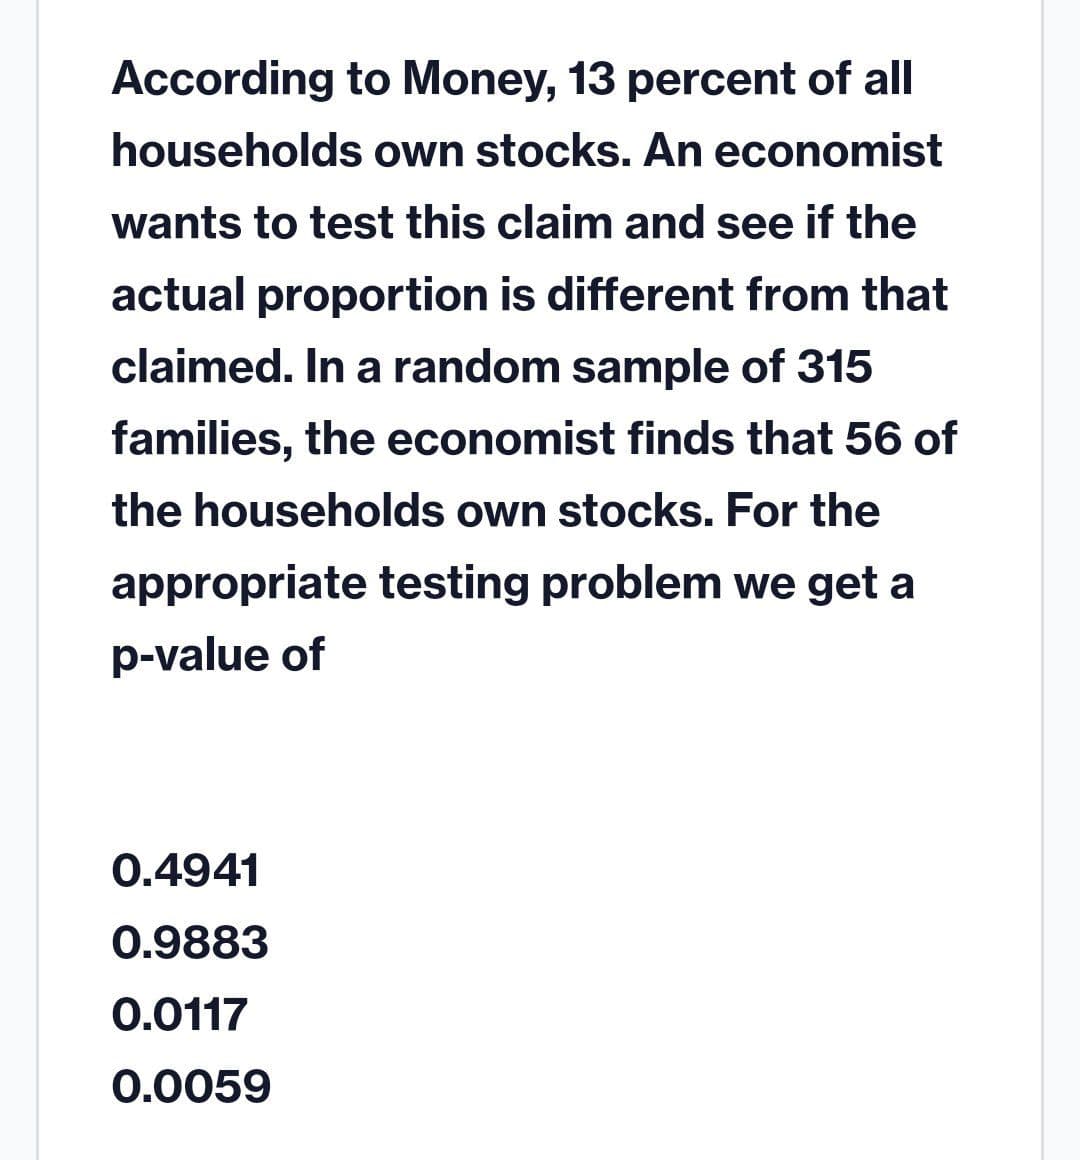 According to Money, 13 percent of all
households own stocks. An economist
wants to test this claim and see if the
actual proportion is different from that
claimed. In a random sample of 315
families, the economist finds that 56 of
the households own stocks. For the
appropriate testing problem we get a
p-value of
0.4941
0.9883
0.0117
0.0059